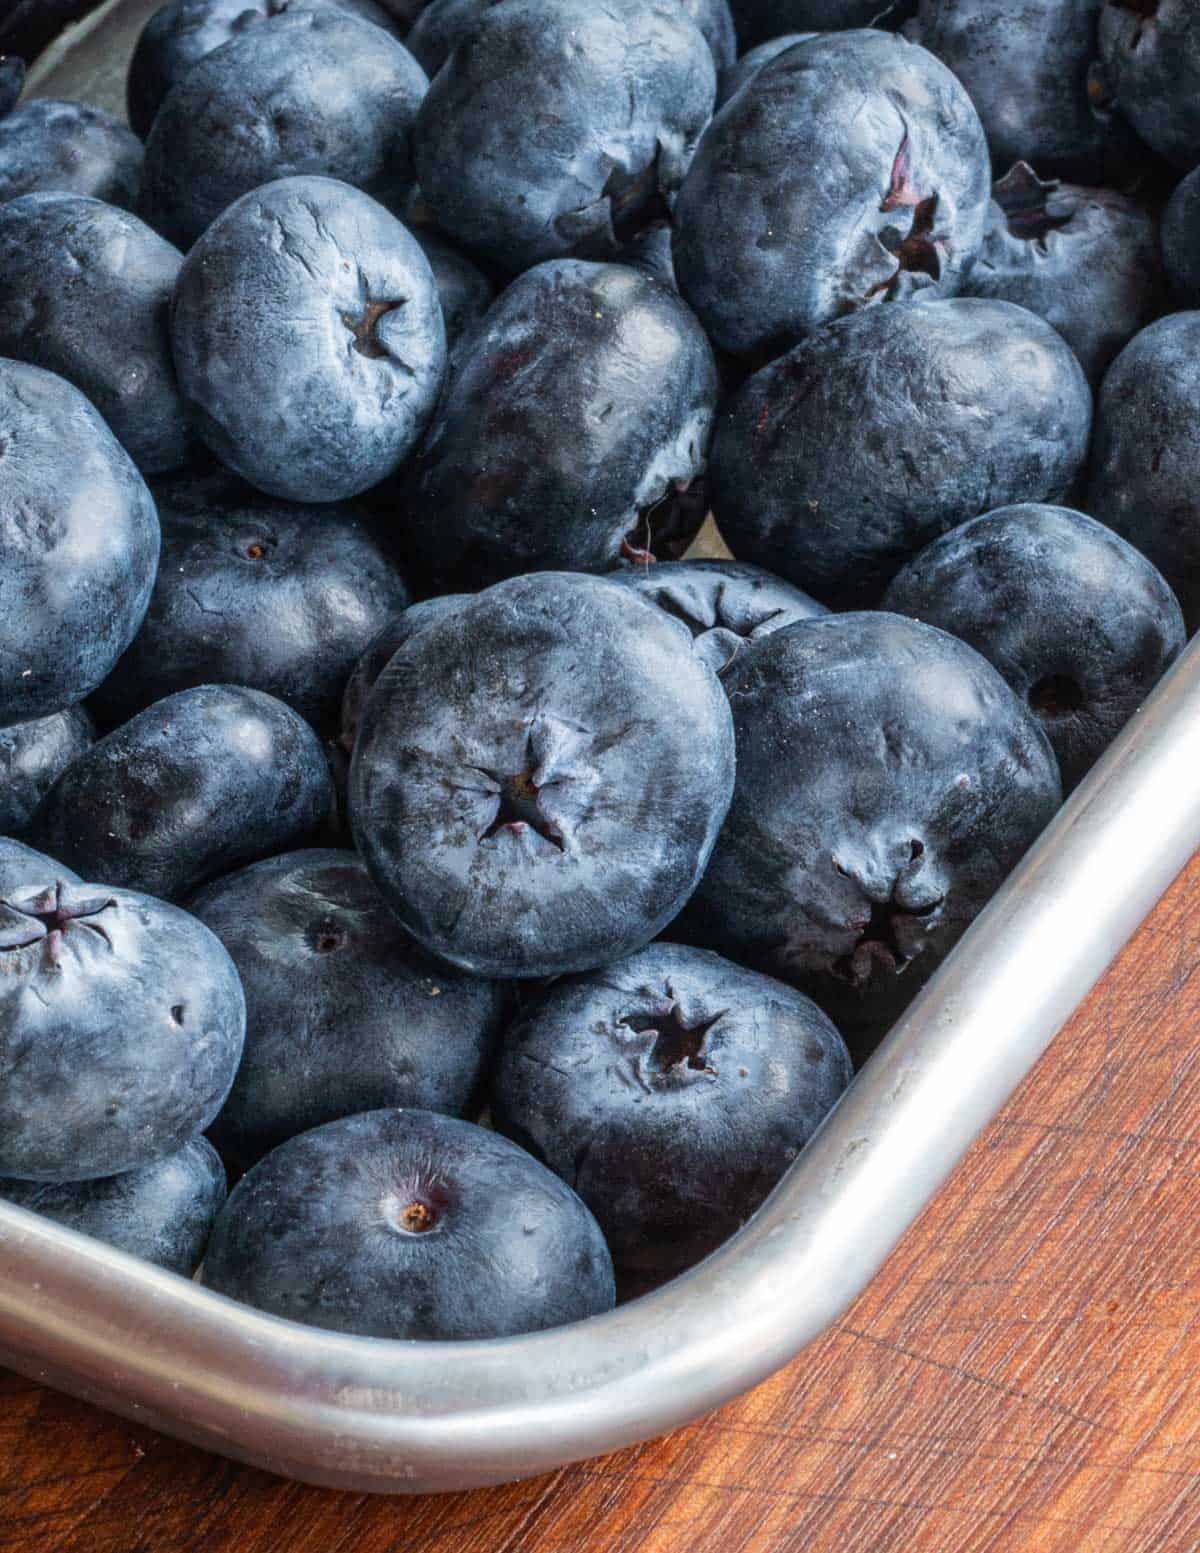 Cultivated blueberries on a baking sheet.